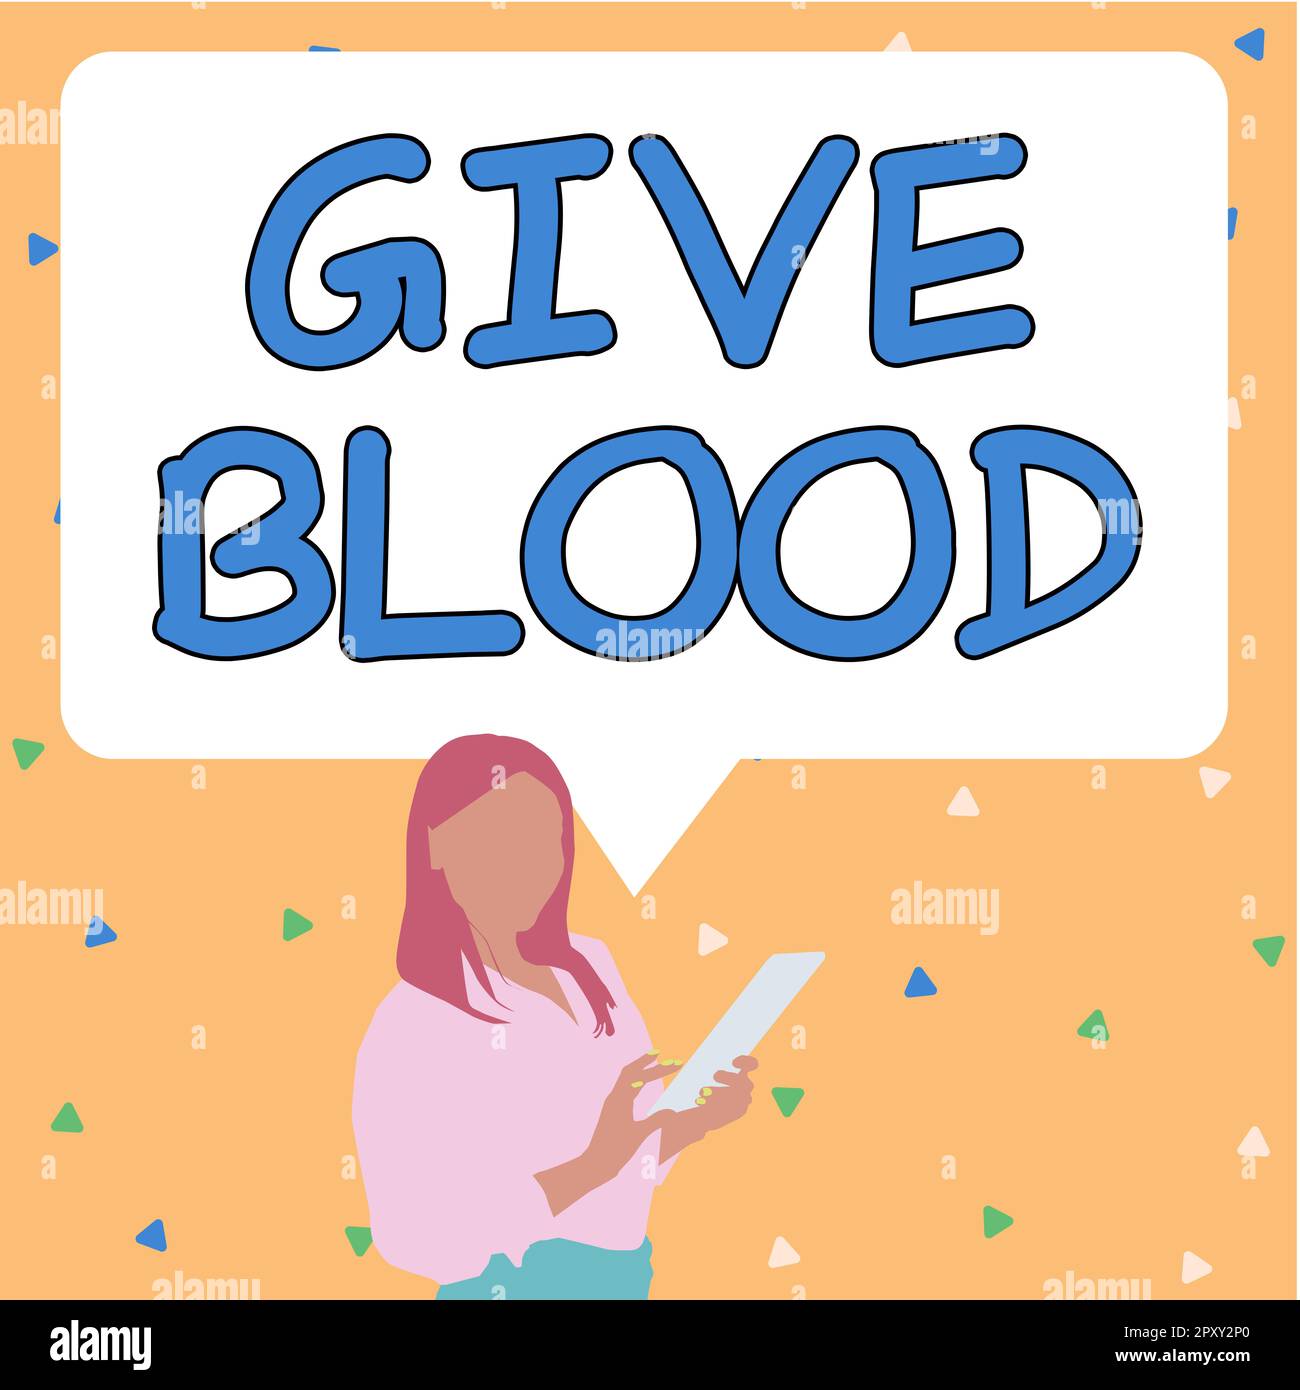 Text sign showing Give Blood, Internet Concept person voluntarily has blood drawn and used for transfusions Stock Photo